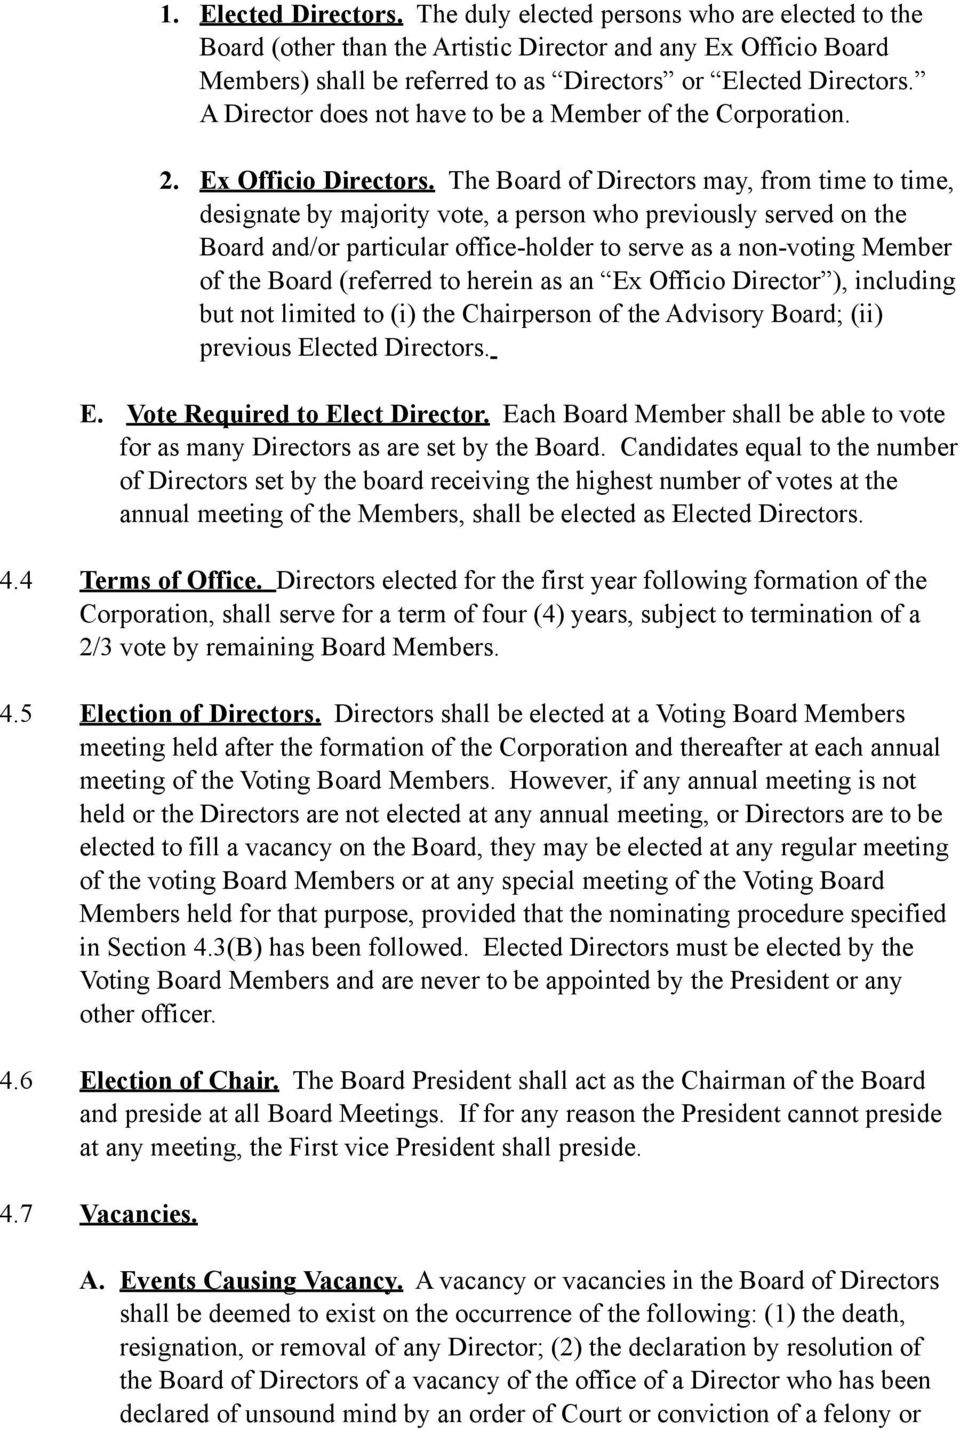 The Board of Directors may, from time to time, designate by majority vote, a person who previously served on the Board and/or particular office-holder to serve as a non-voting Member of the Board